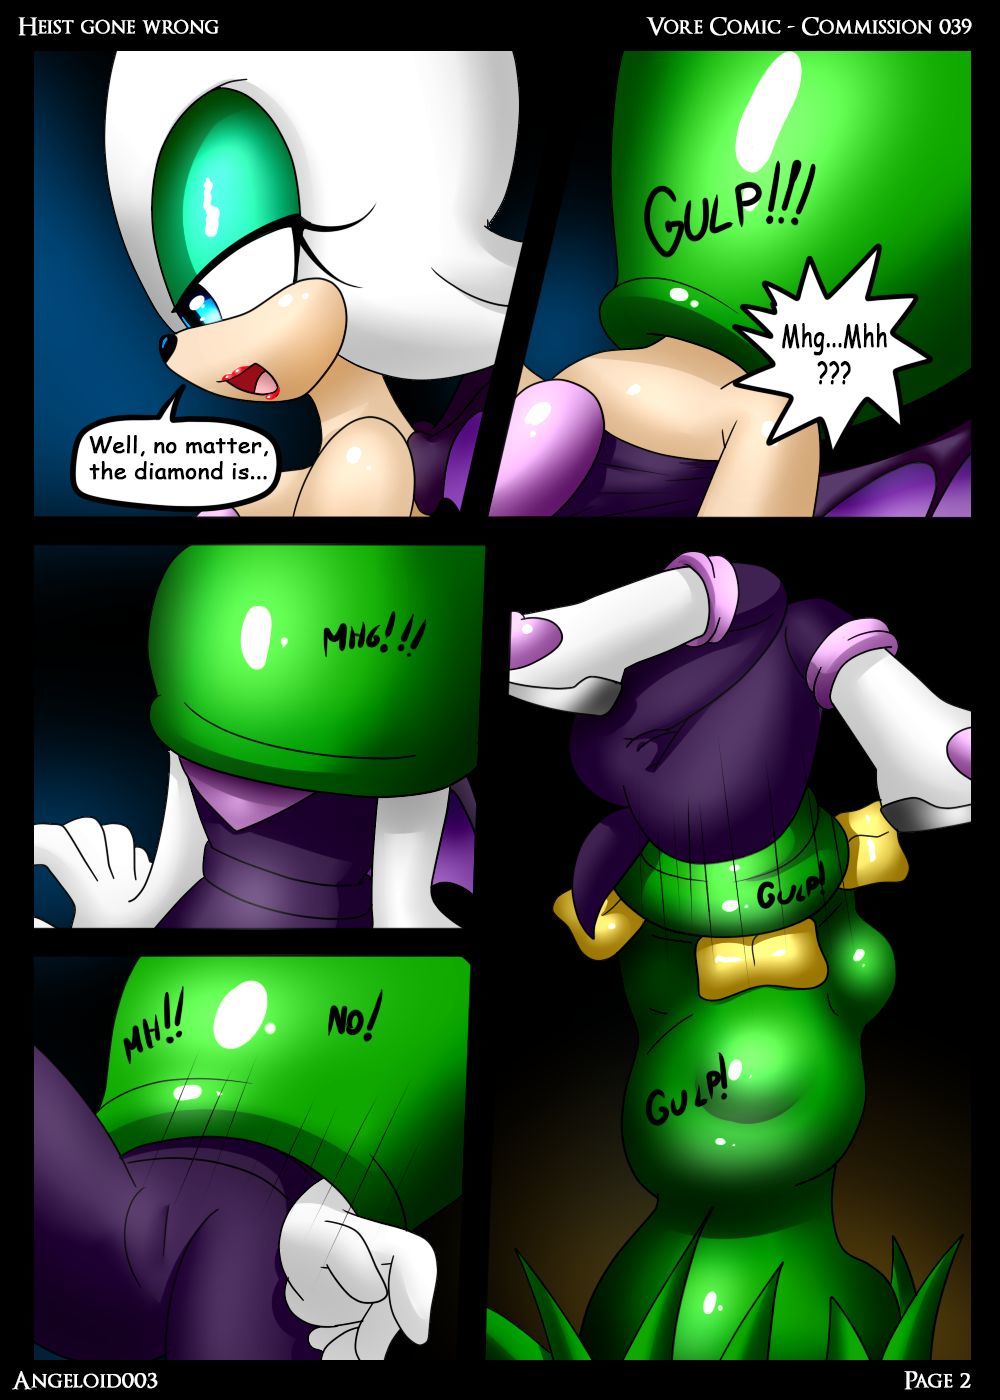 Heist Gone Wrong - Angeloid003 [Sonic The Hedgehog] page 2